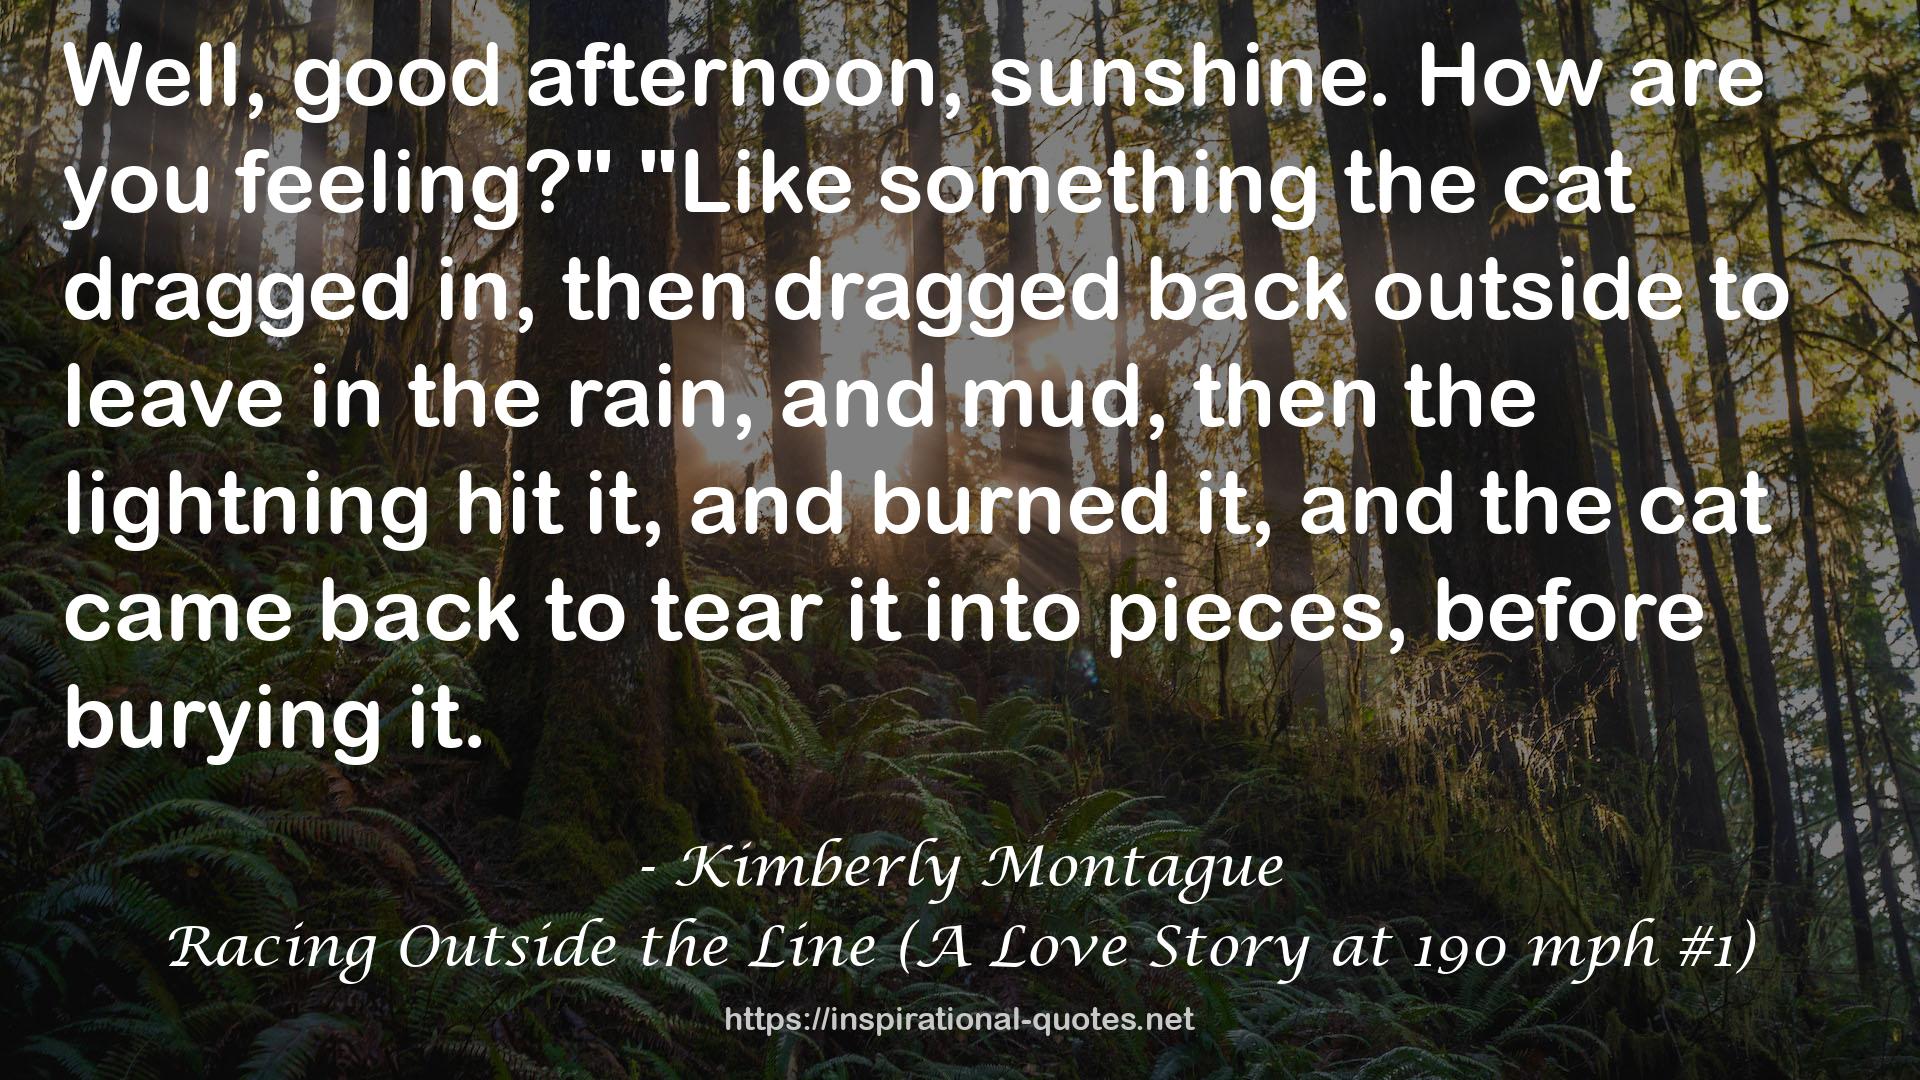 Kimberly Montague QUOTES